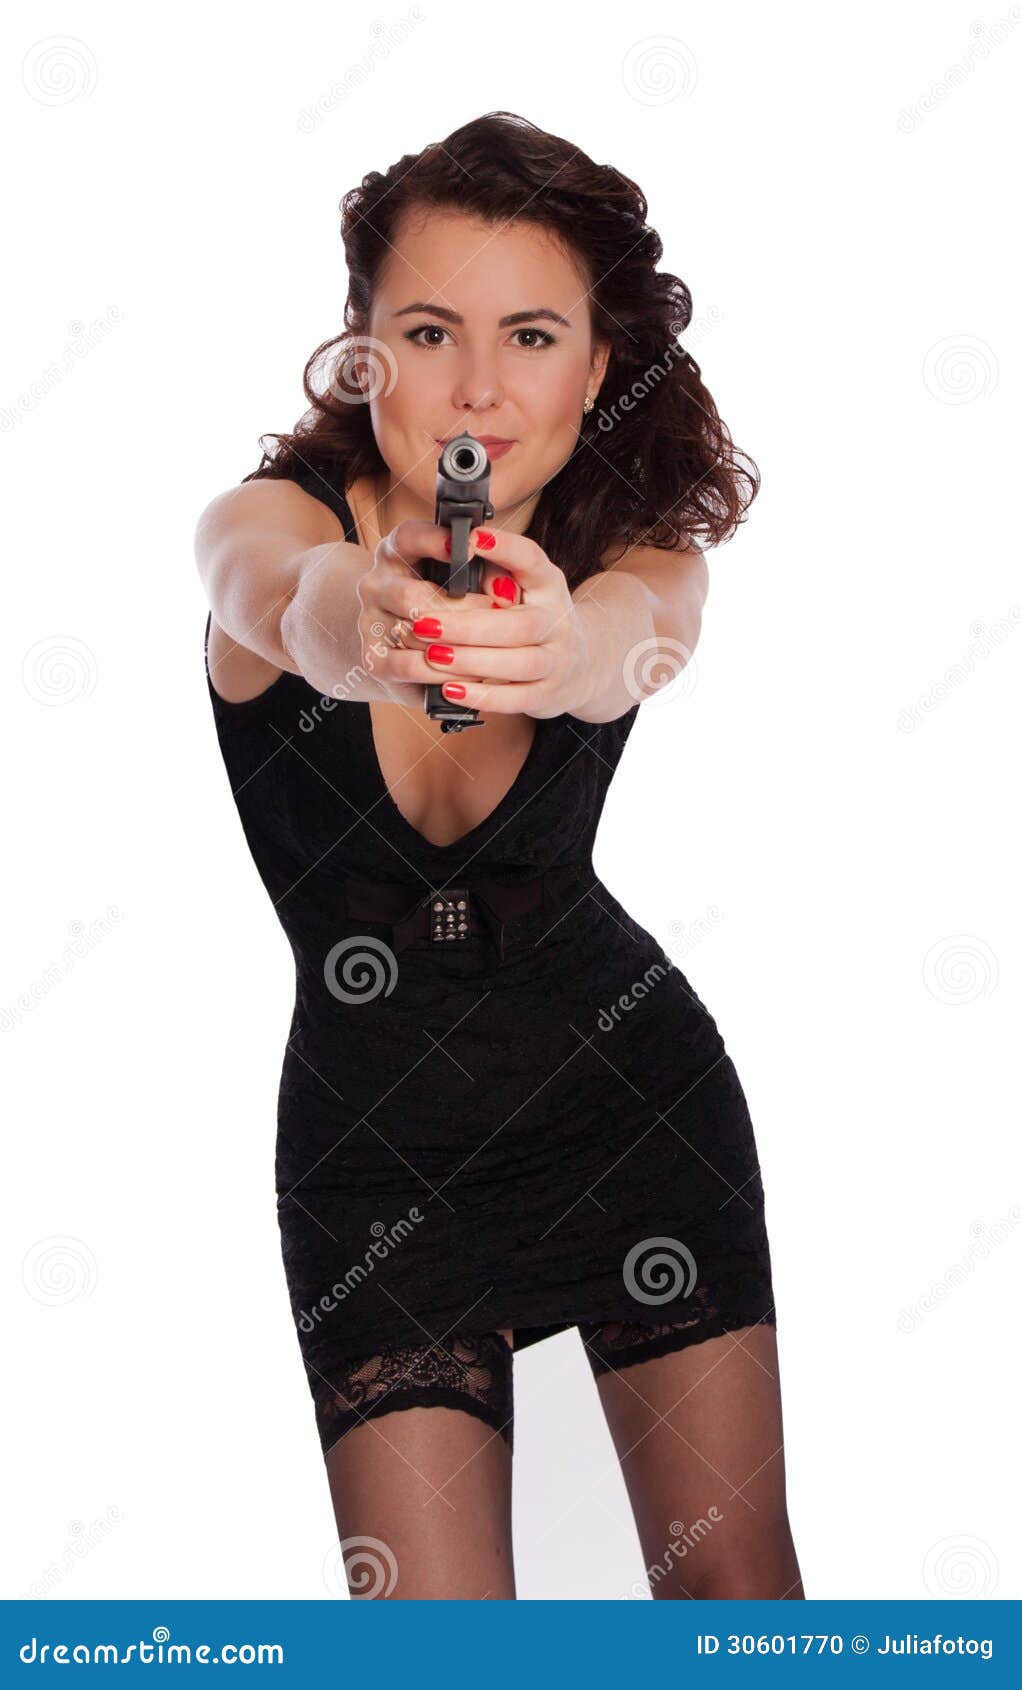 Sexy Woman In Black Dress With A Gun Stock Photo - Image: 30601770